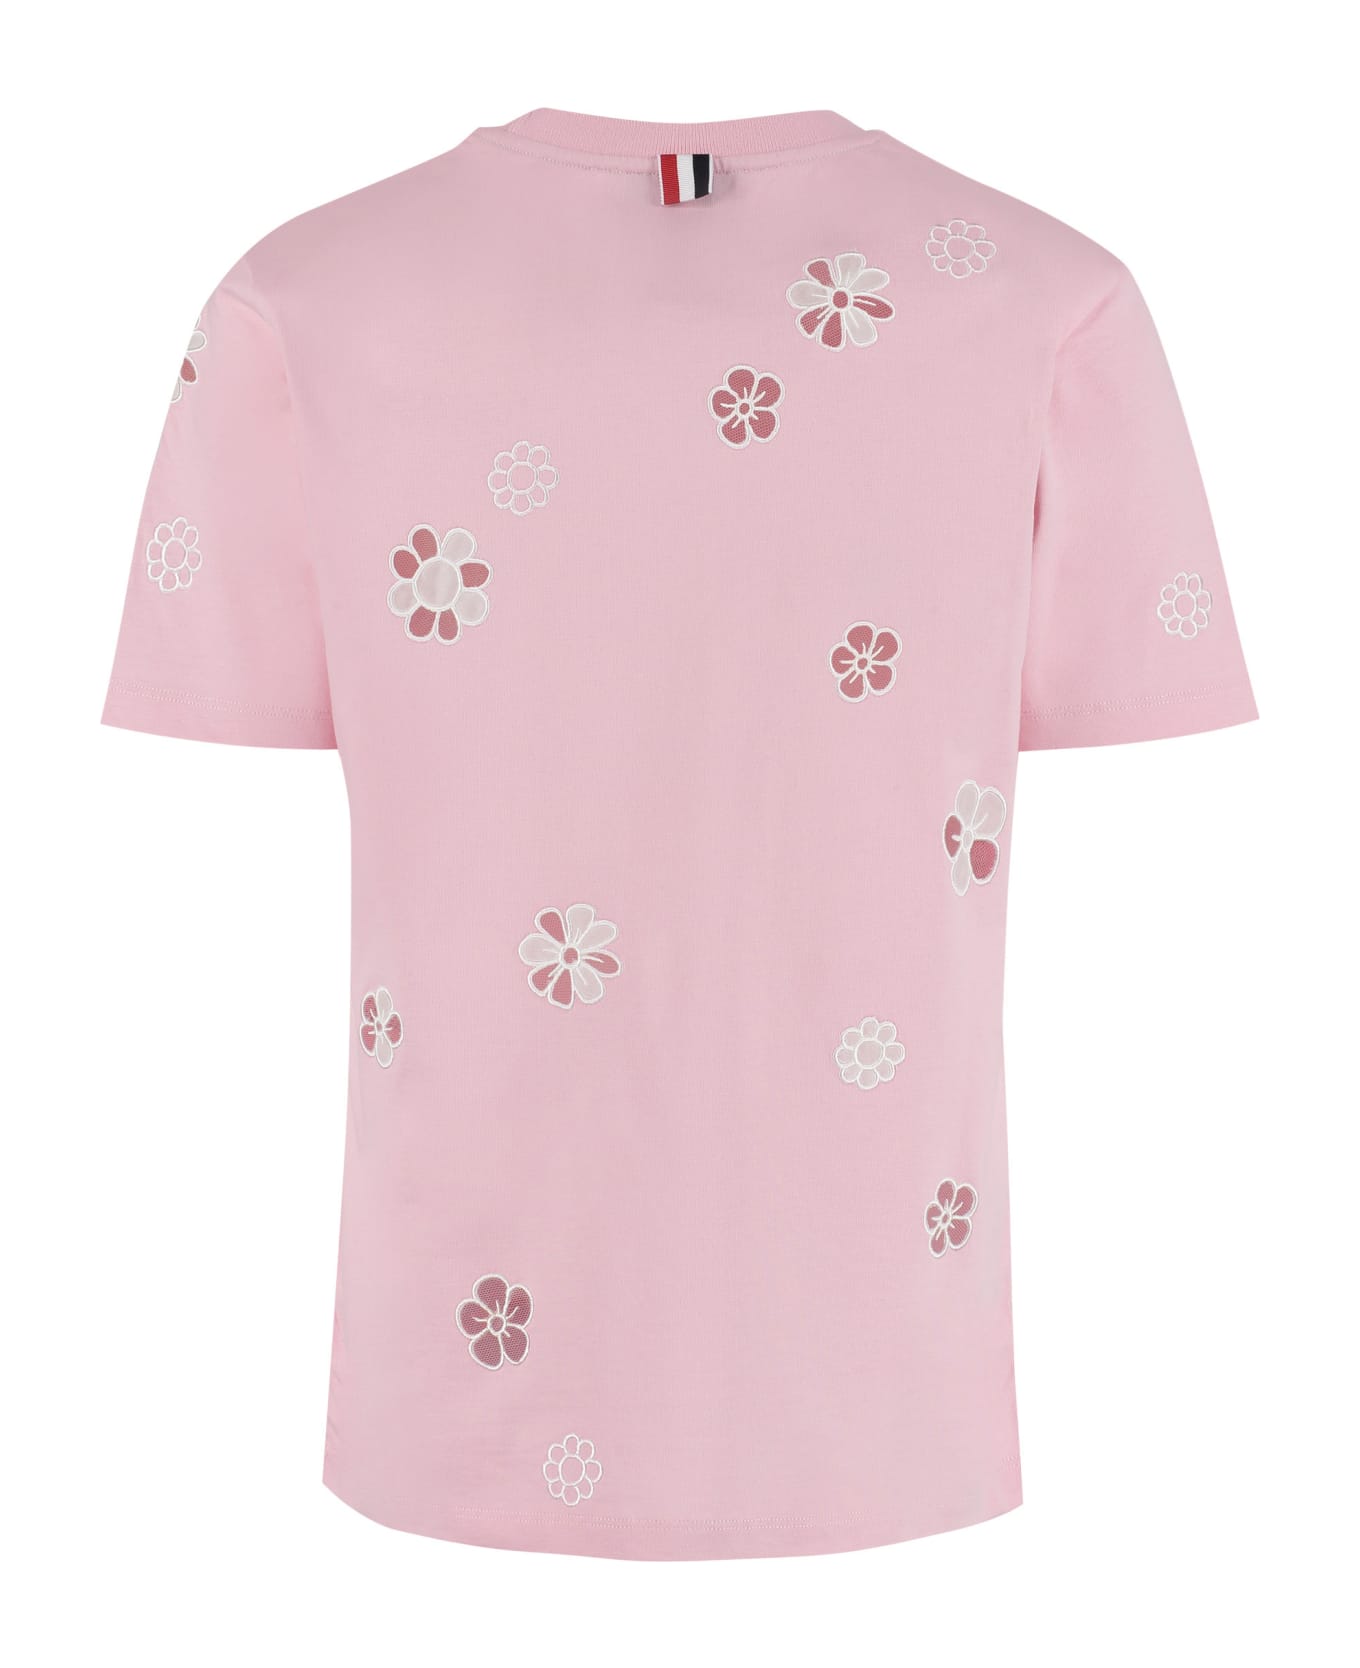 Thom Browne Embroidered Cotton T-shirt - Pink